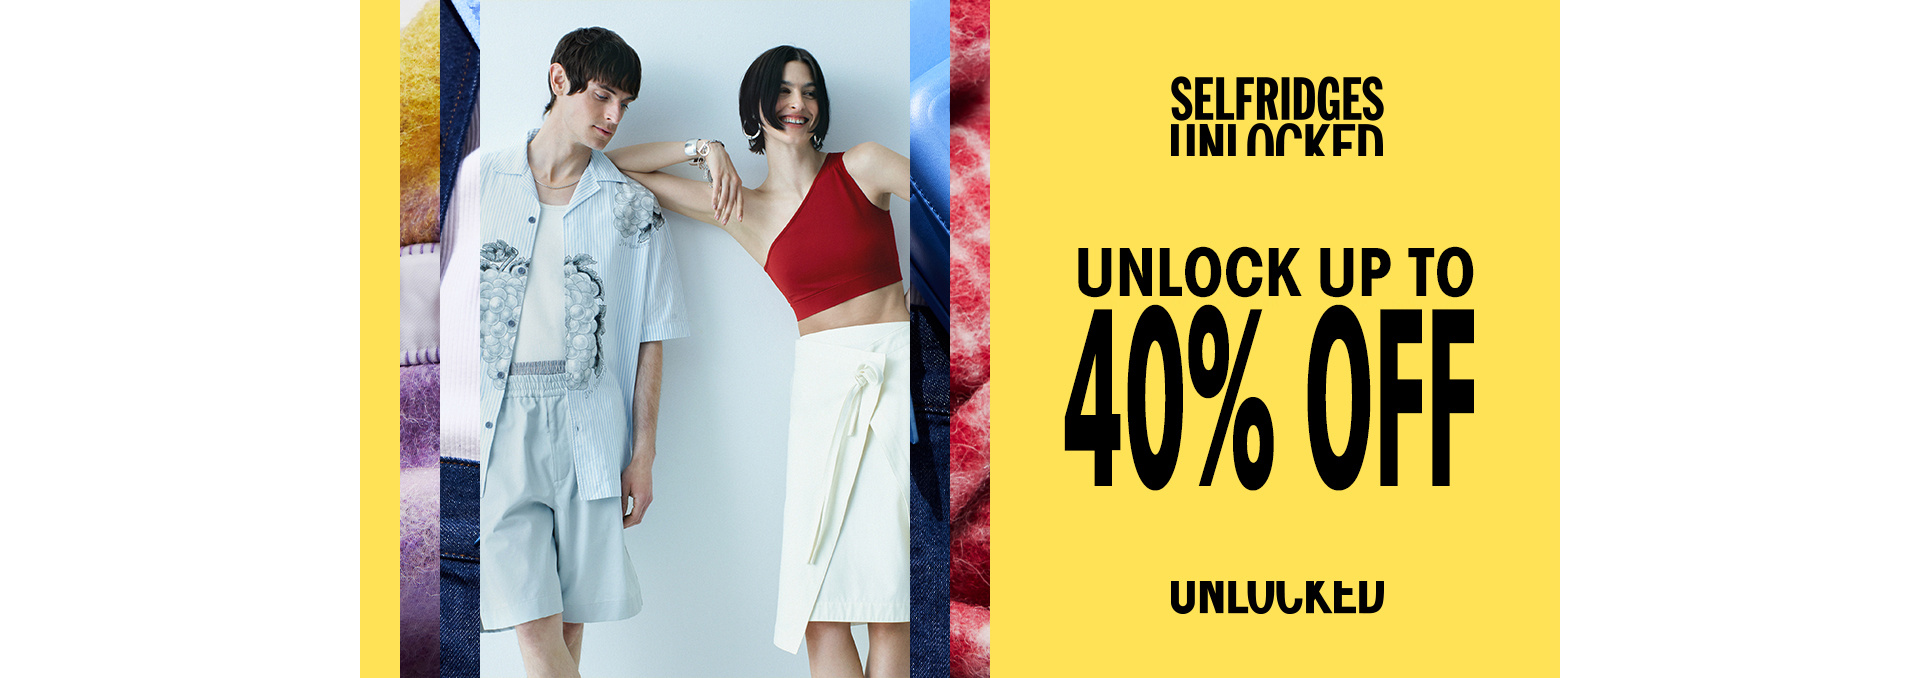 UNLOCK UP TO 40% OFF